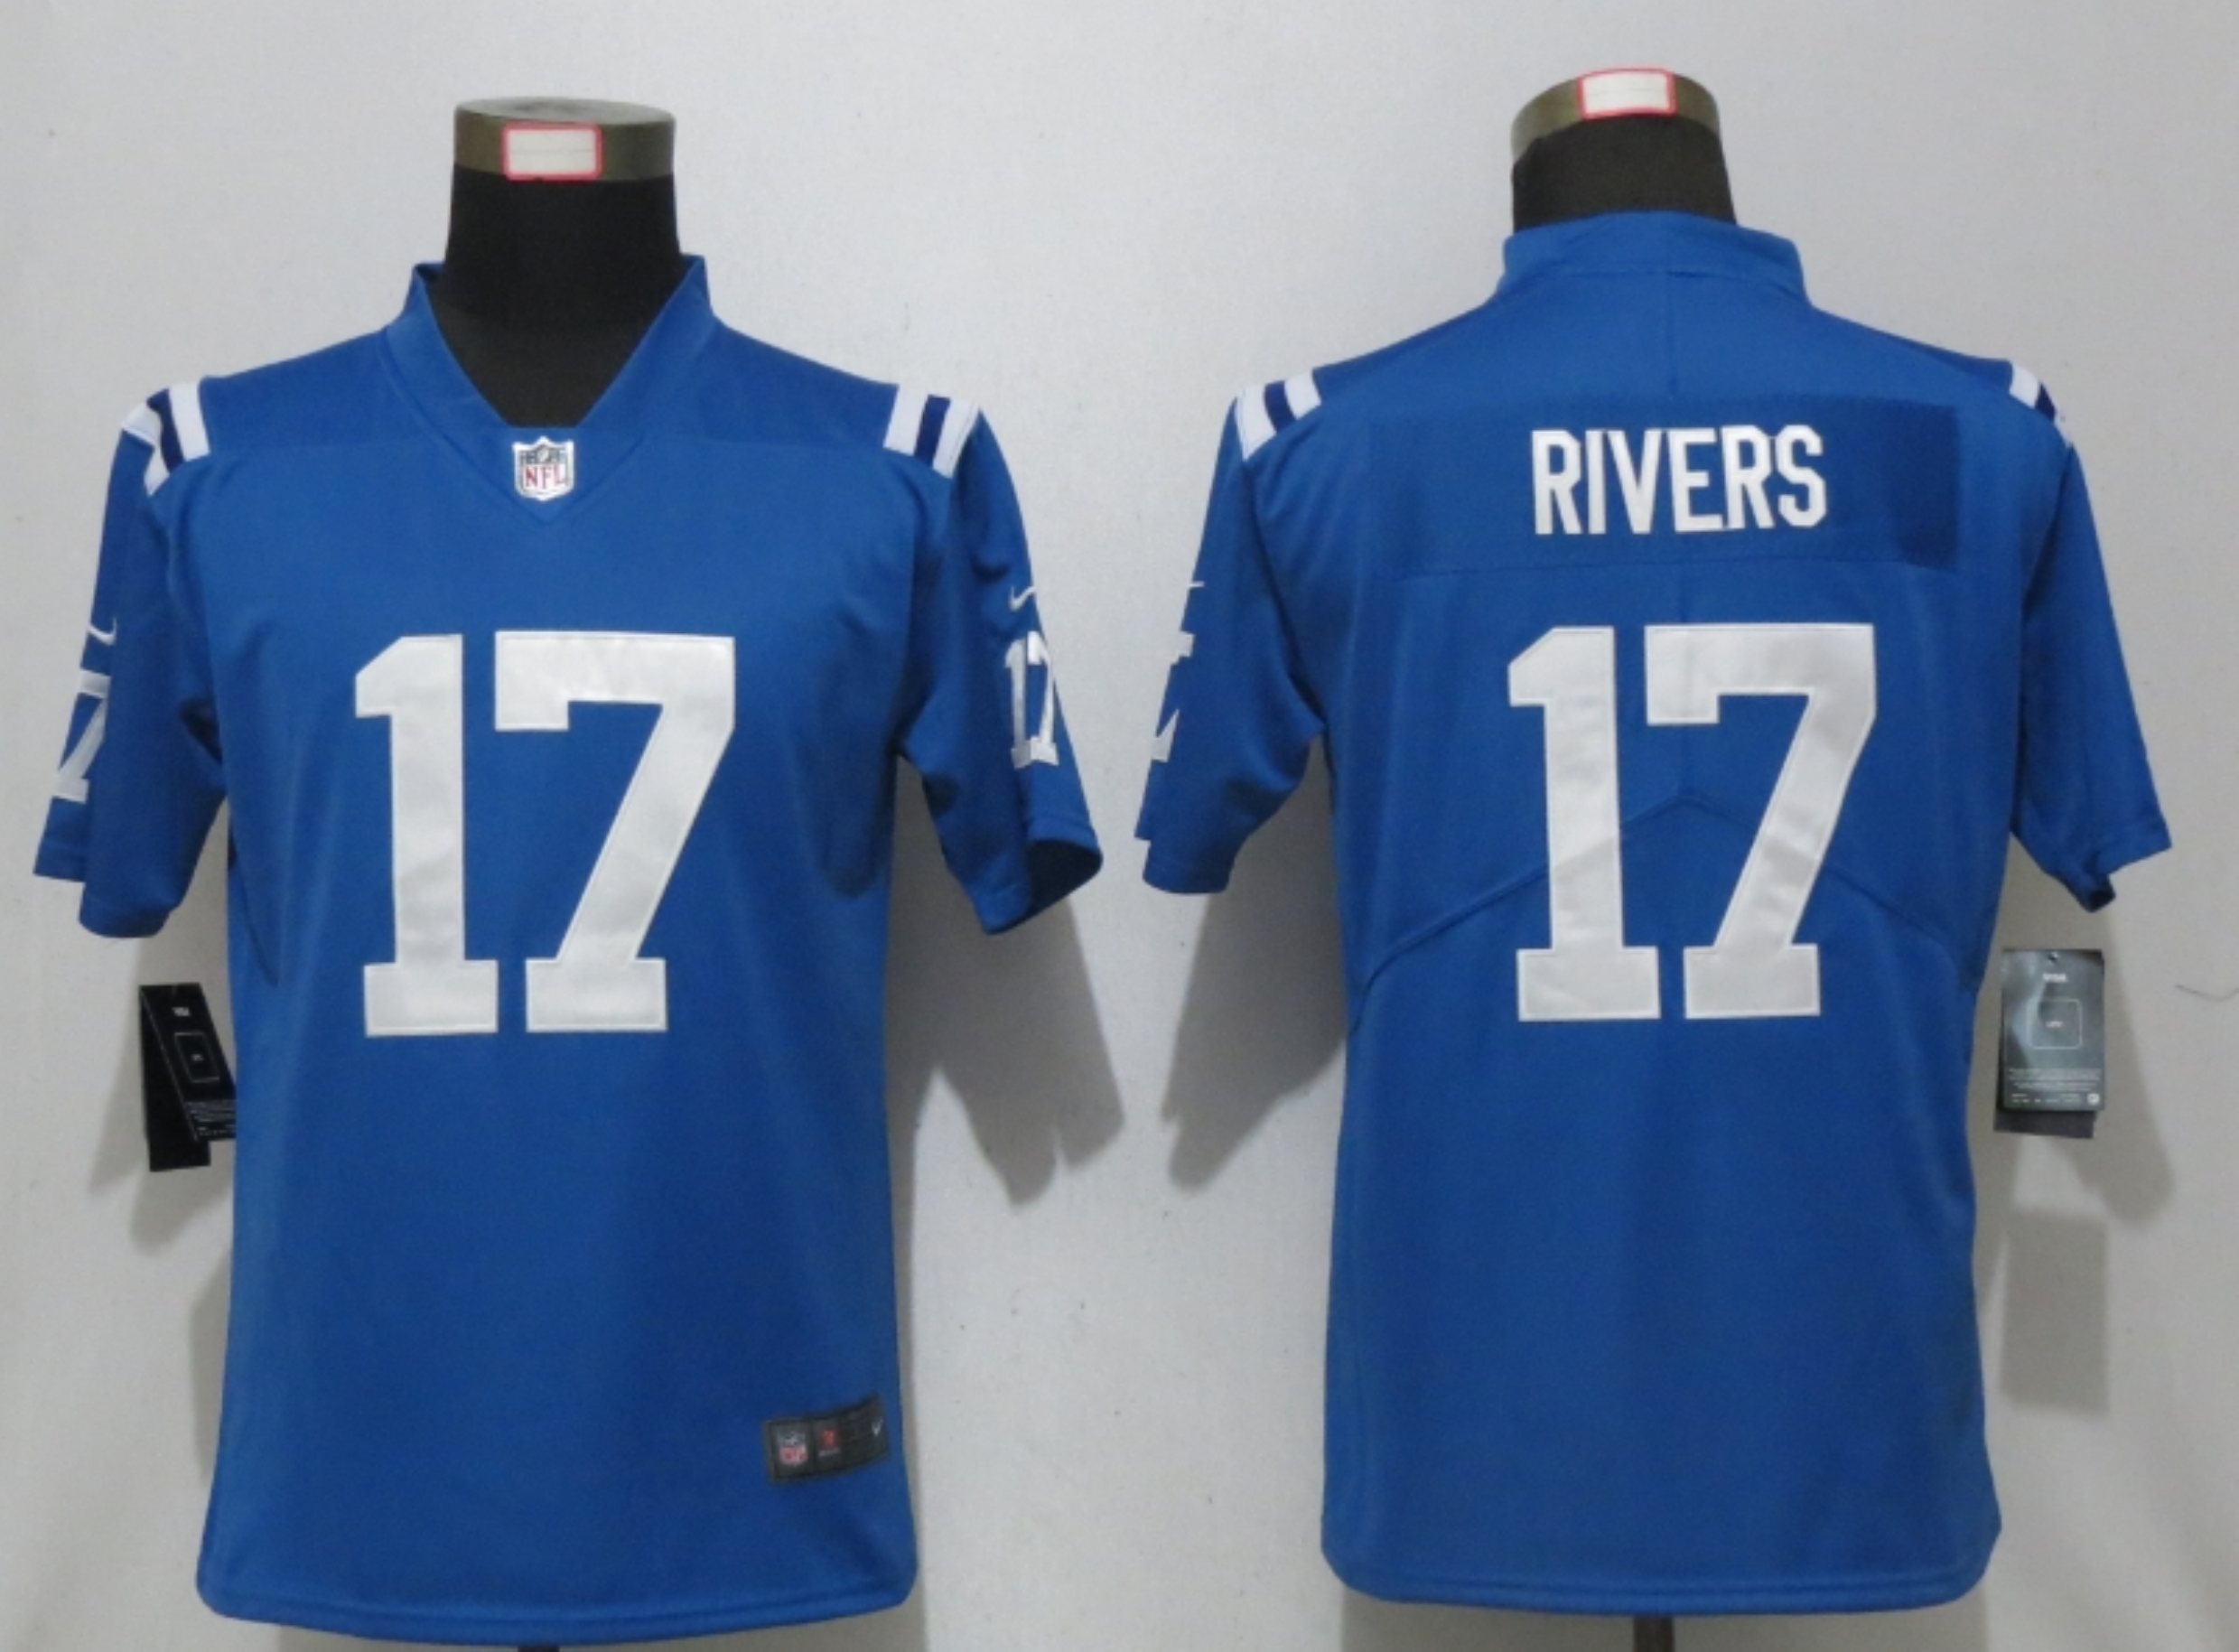 Women's Indianapolis Colts #17 Philip Rivers Royal Blue 2020 Vapor Untouchable Stitched NFL Nike Limited Jersey